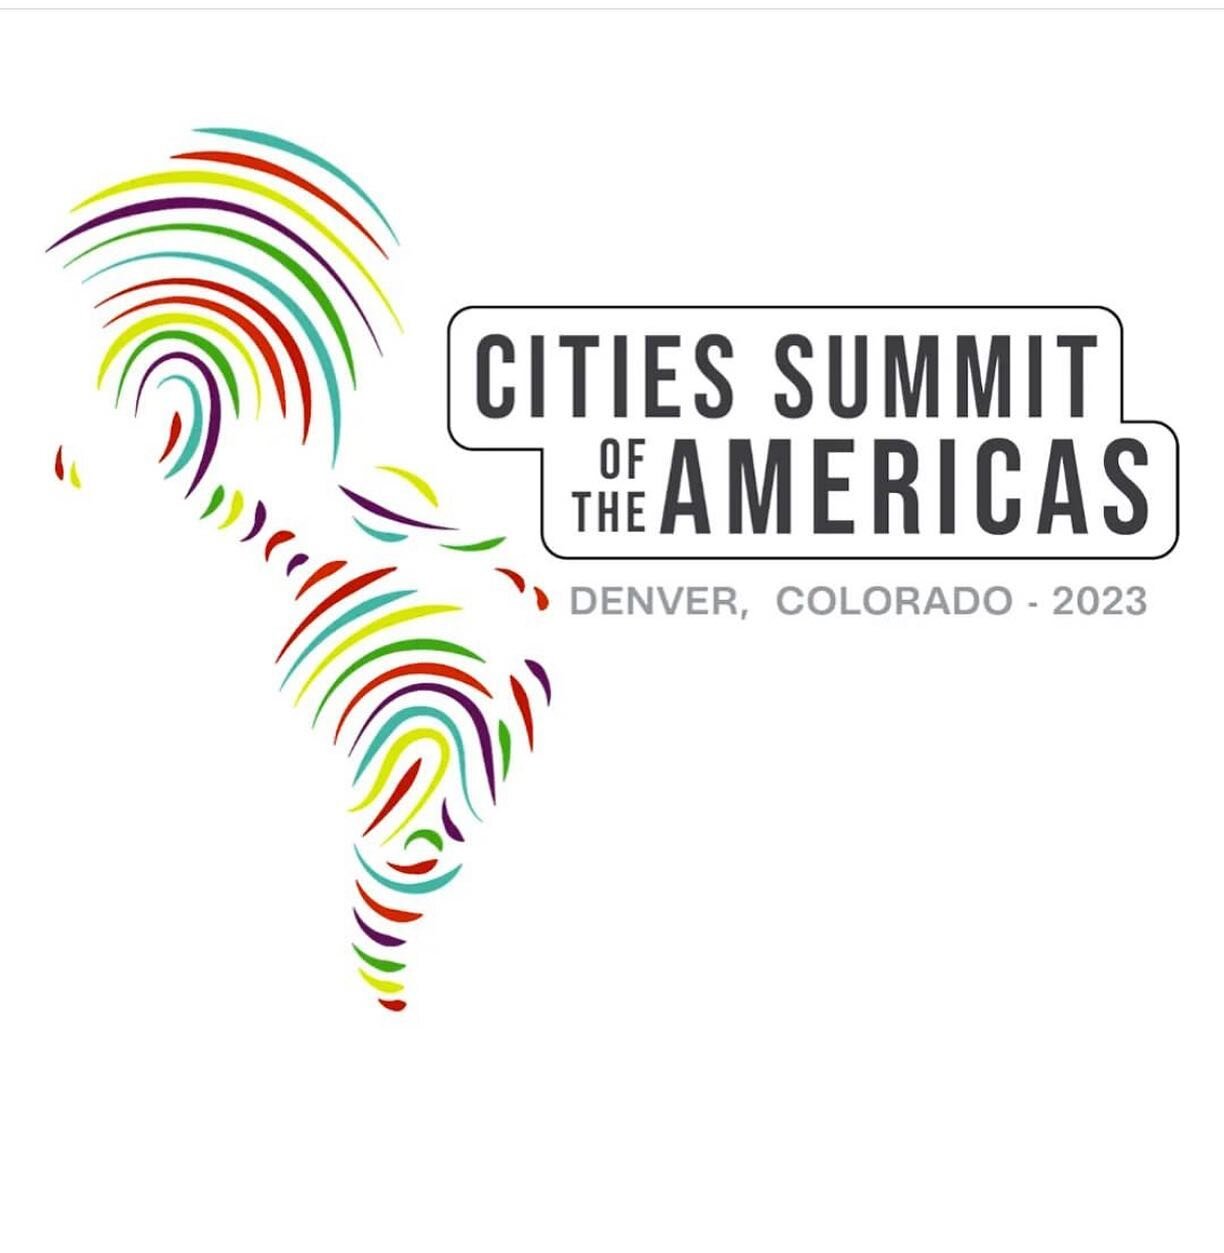 Today! ☀️OUT OF MANY, MORE: VOICES OF THE AMERICAS

APRIL 27-MAY 4, 2023

In celebration of the Cities Summit of the Americas, CU Denver's Experience Gallery is featuring artists with ties to cultures and people from North, Central, and South America